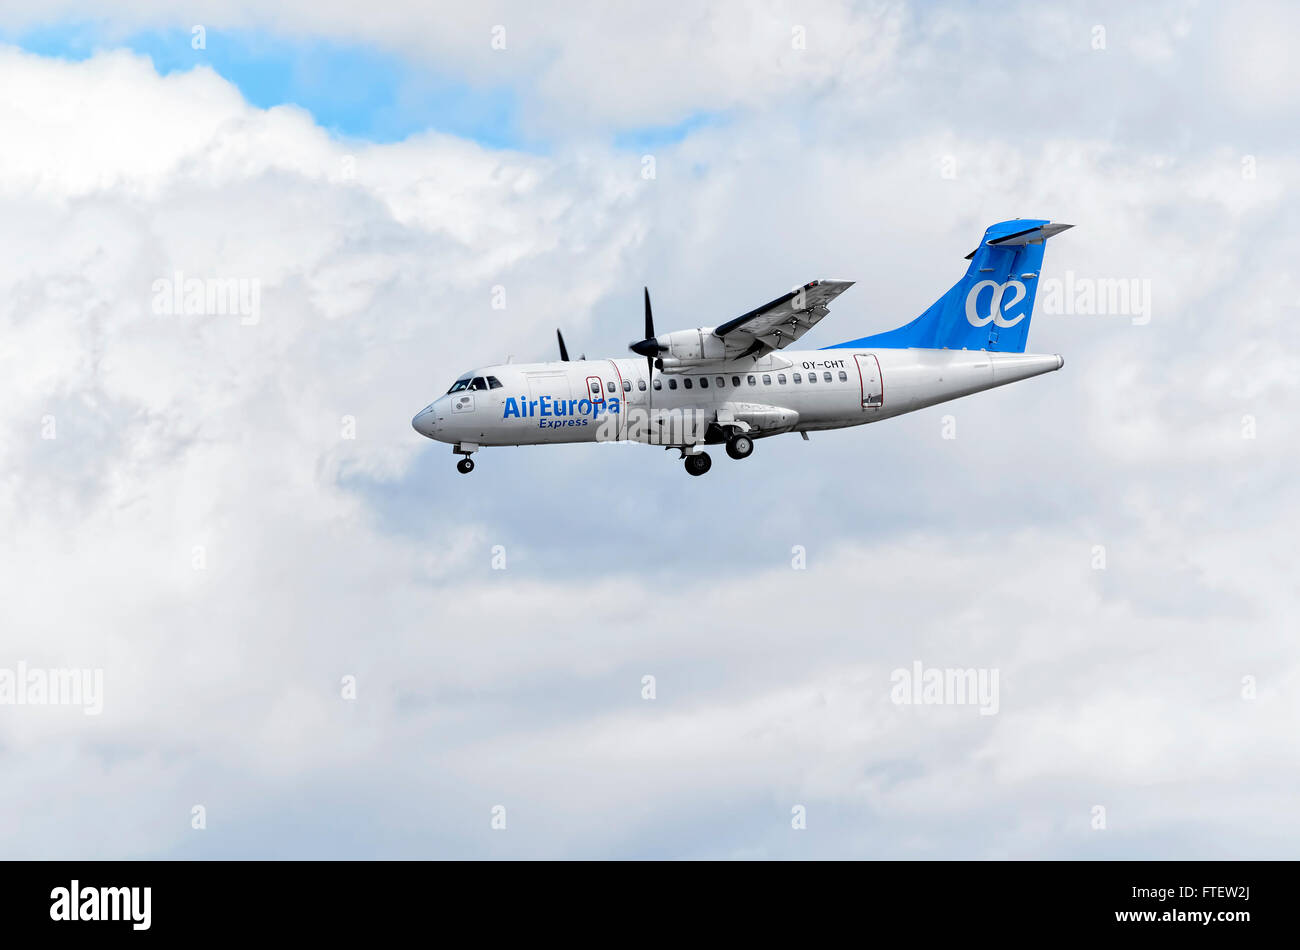 Regional airliner -ATR 42-300-, of -Air Europa Express- airline, is coming, ready to land, to Madrid airport. Photo set: 2 of 3. Stock Photo